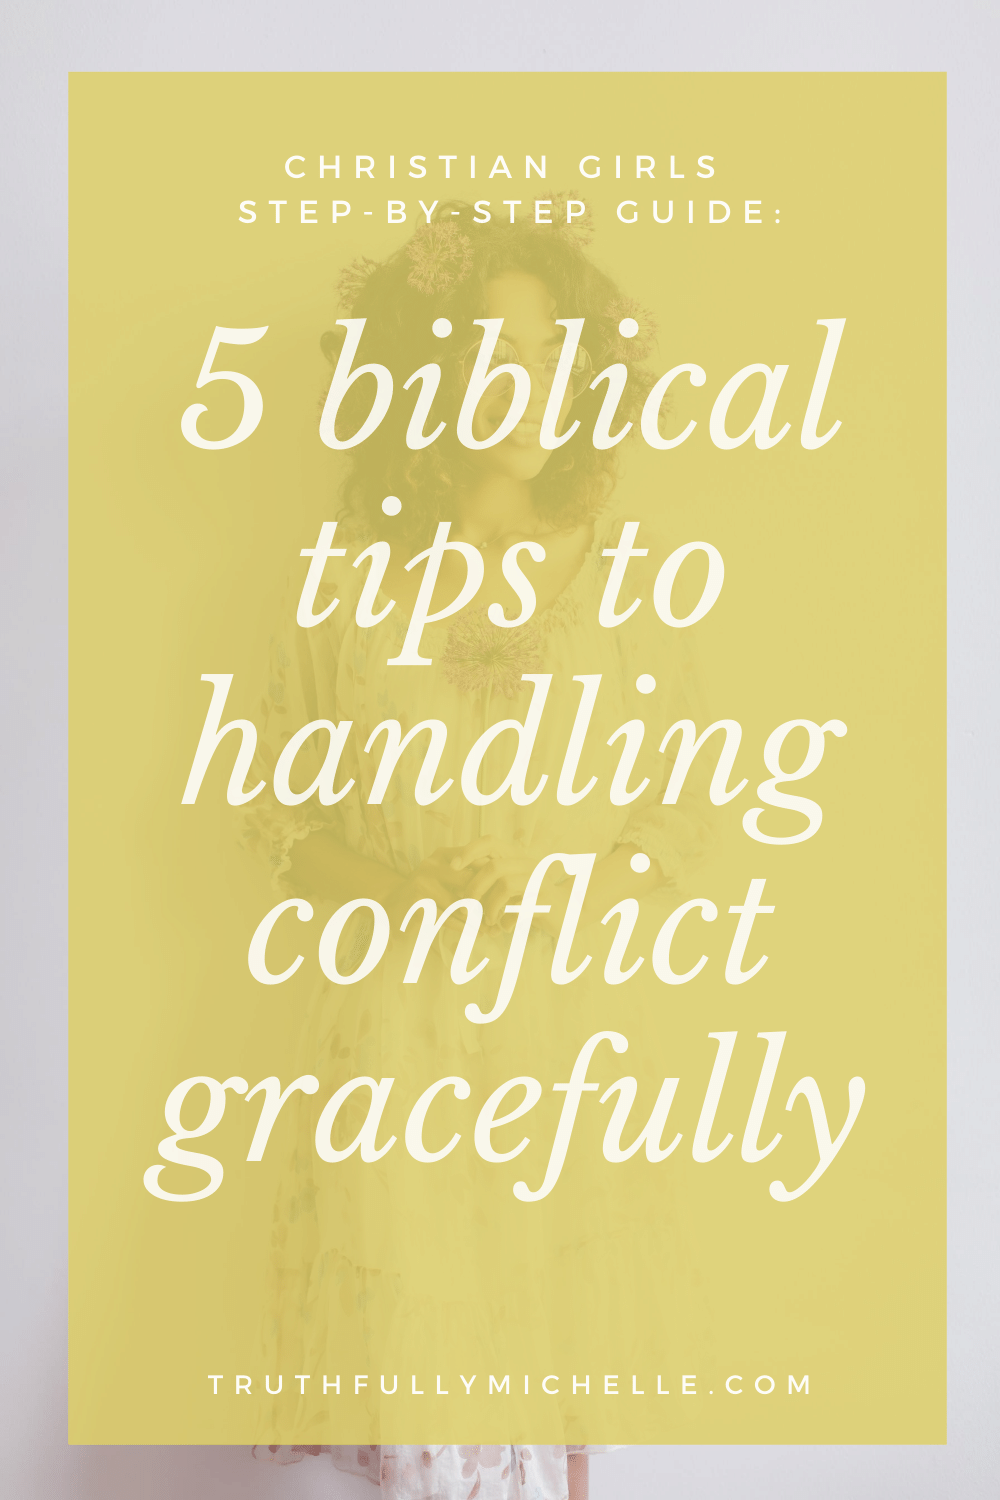 How to handle conflict biblically, Biblical conflict, Biblical reconciliation, Conflict resolution bible, Conflict resolution for Christians, Conflict resolution for adults tips, How to deal with conflict, How to resolve conflict, How to handle disagreements biblically, How to deal with disagreements, Biblical conflict resolution steps and strategies